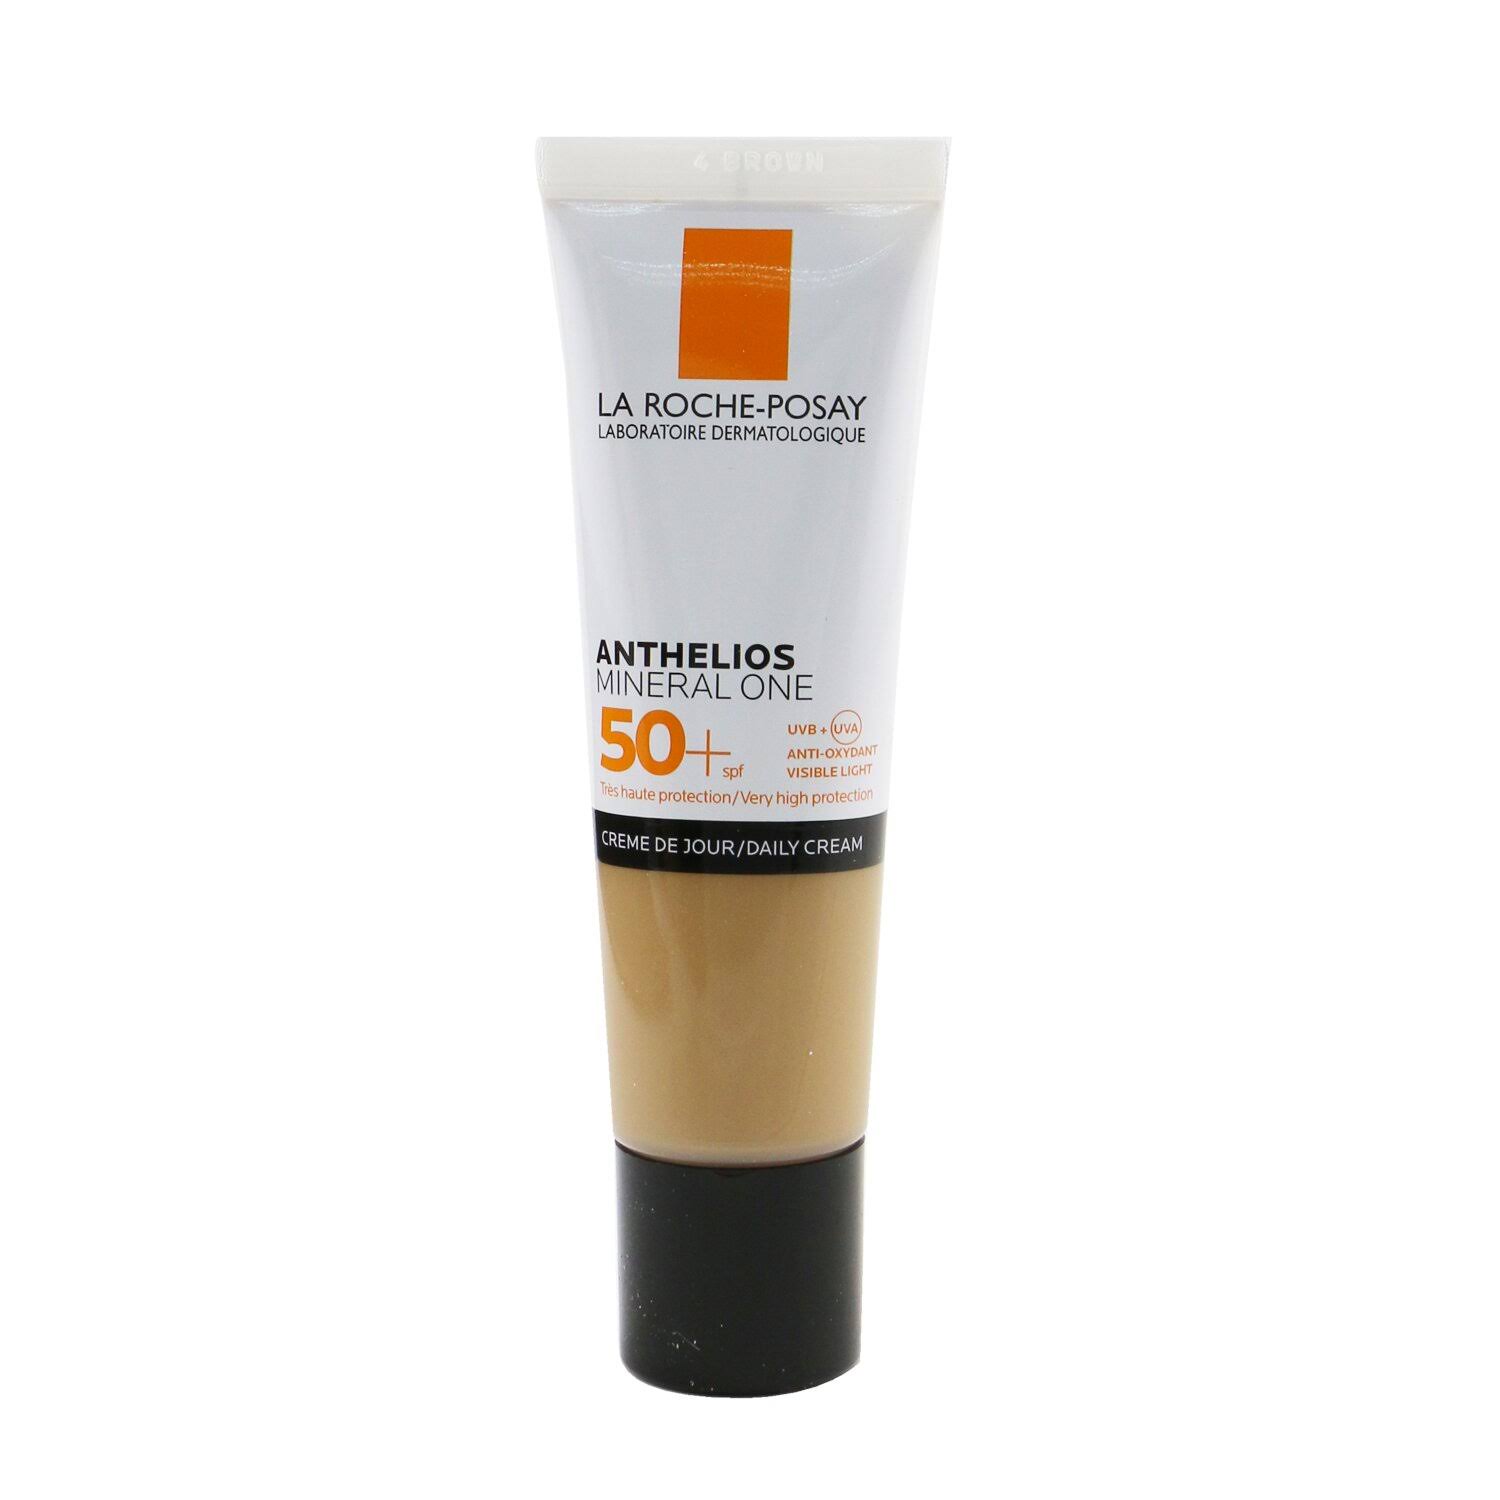 La Roche Posay Anthelios Mineral One SPF50+ Brown 30ml